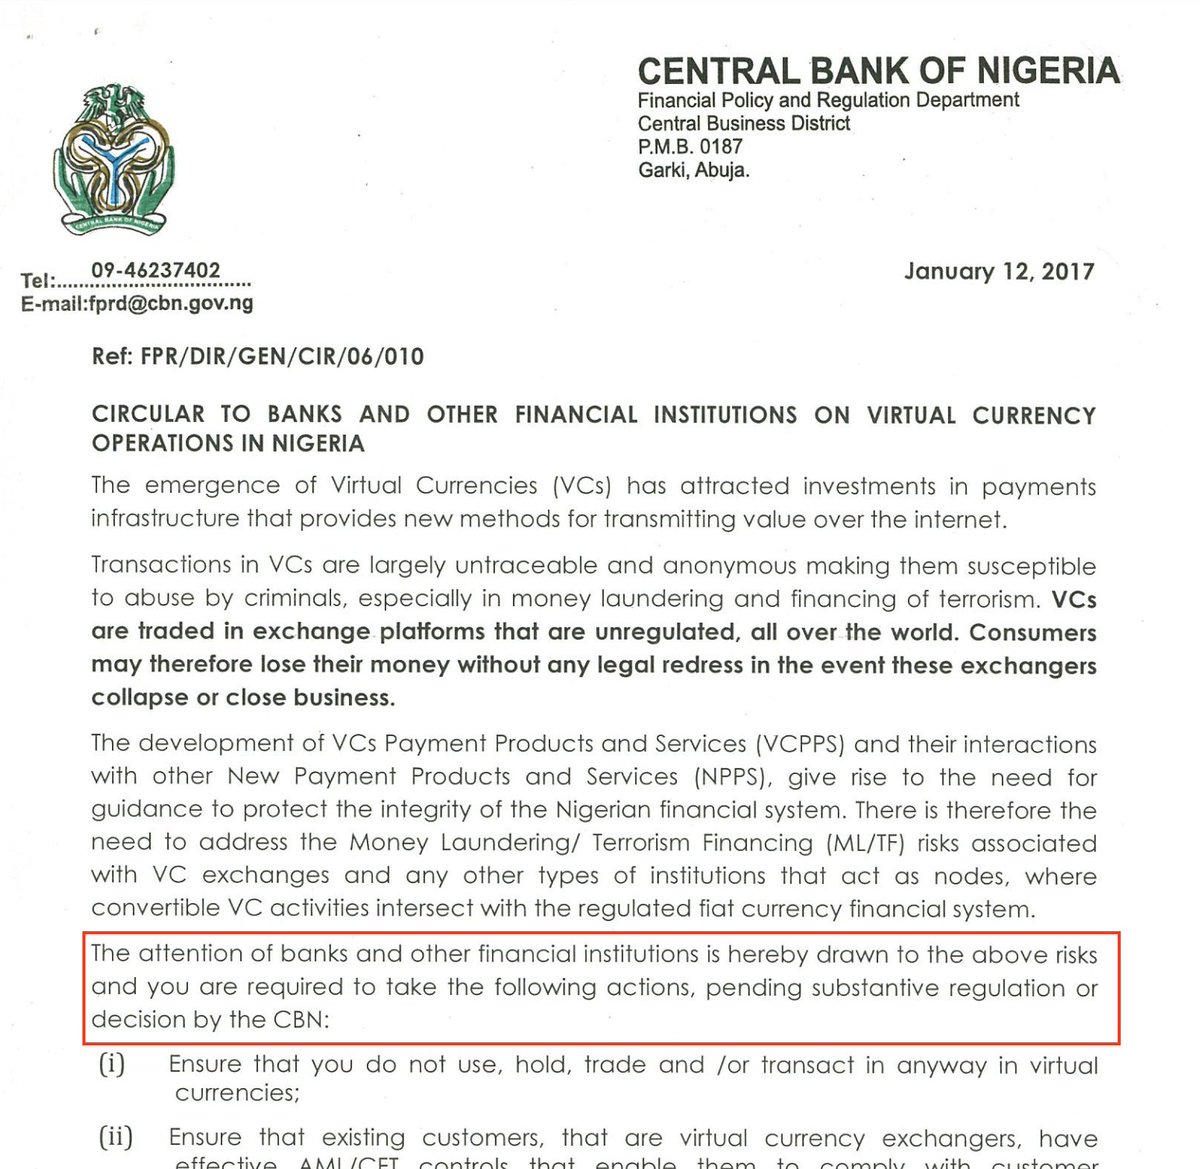 Fast forward to 2021, CBN comes with a circular that said "remember our regulative directives on this subject" when in fact 2017 letter clearly said "no substantive regulation or decision yet" and 2018 said "we wish to caution all and sundry".